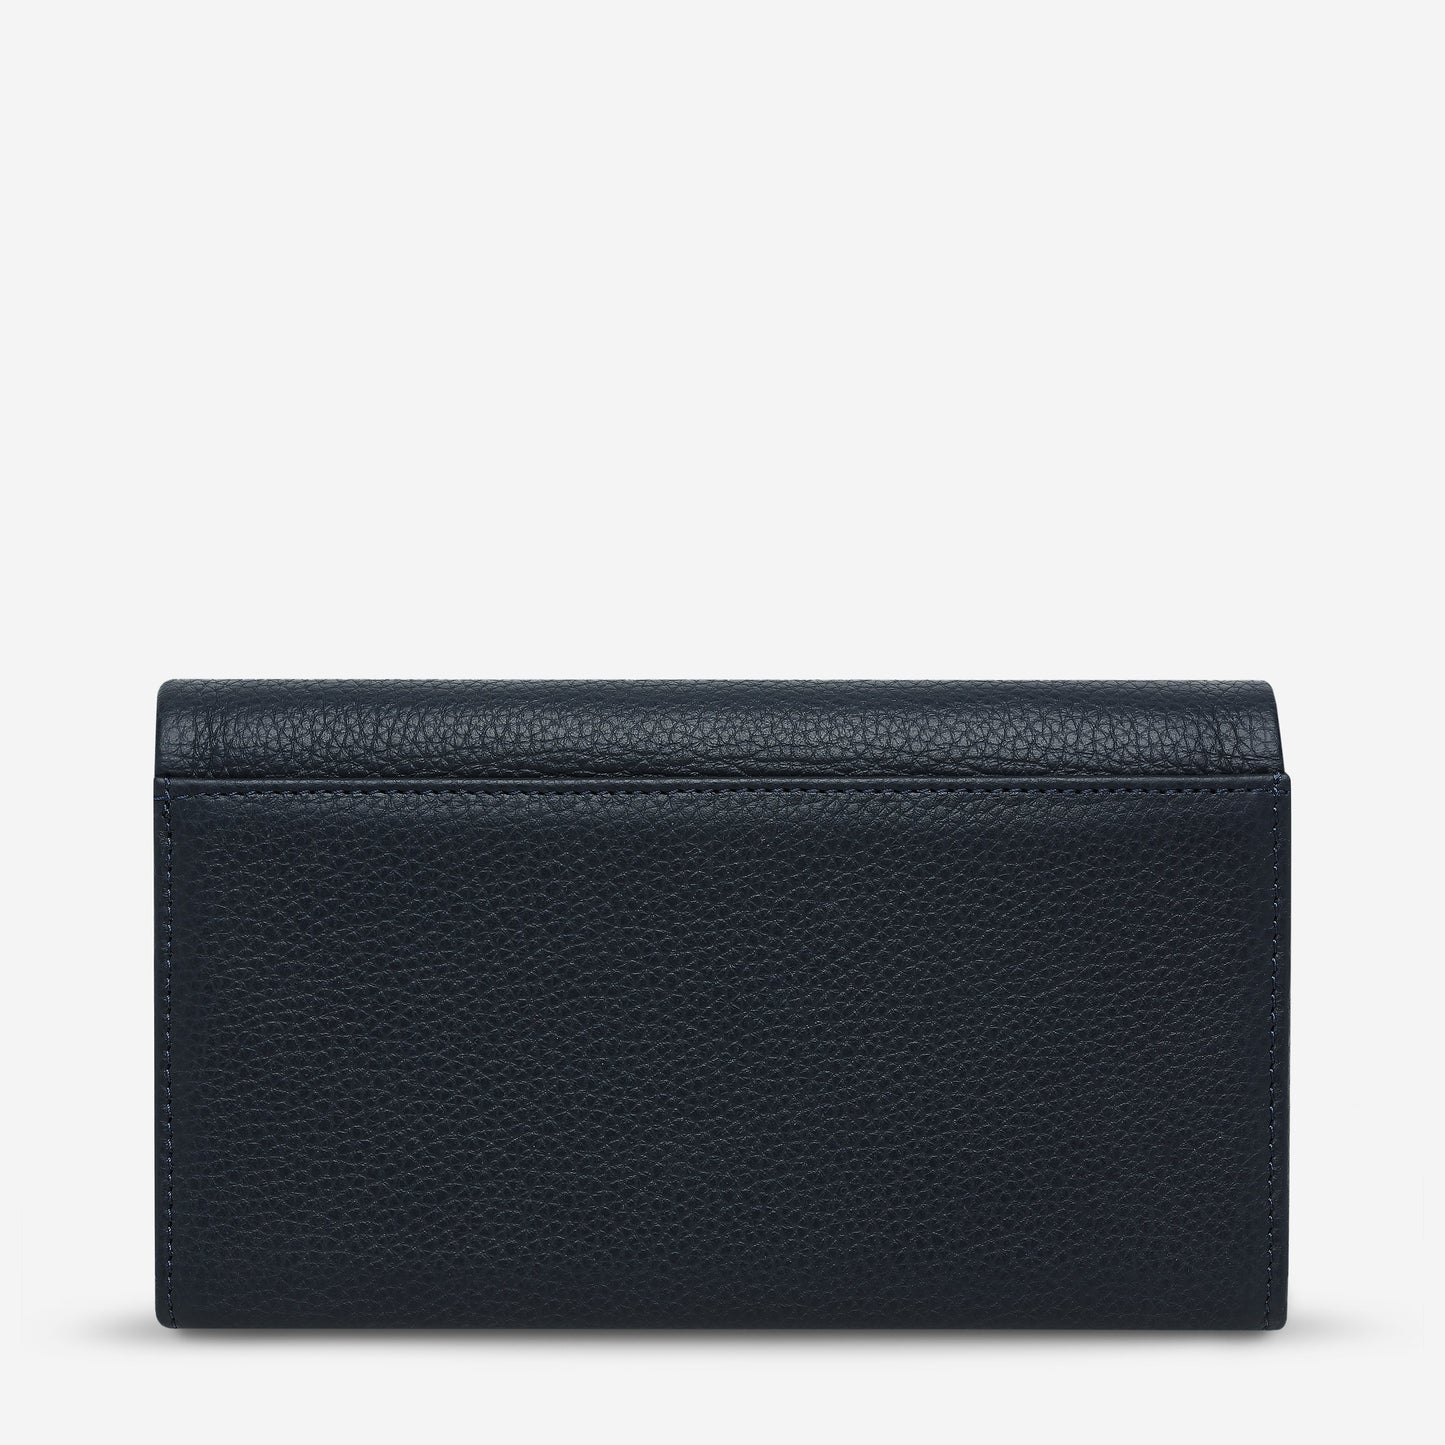 STATUS ANXIETY NEVERMIND WALLET NAVY BLUE